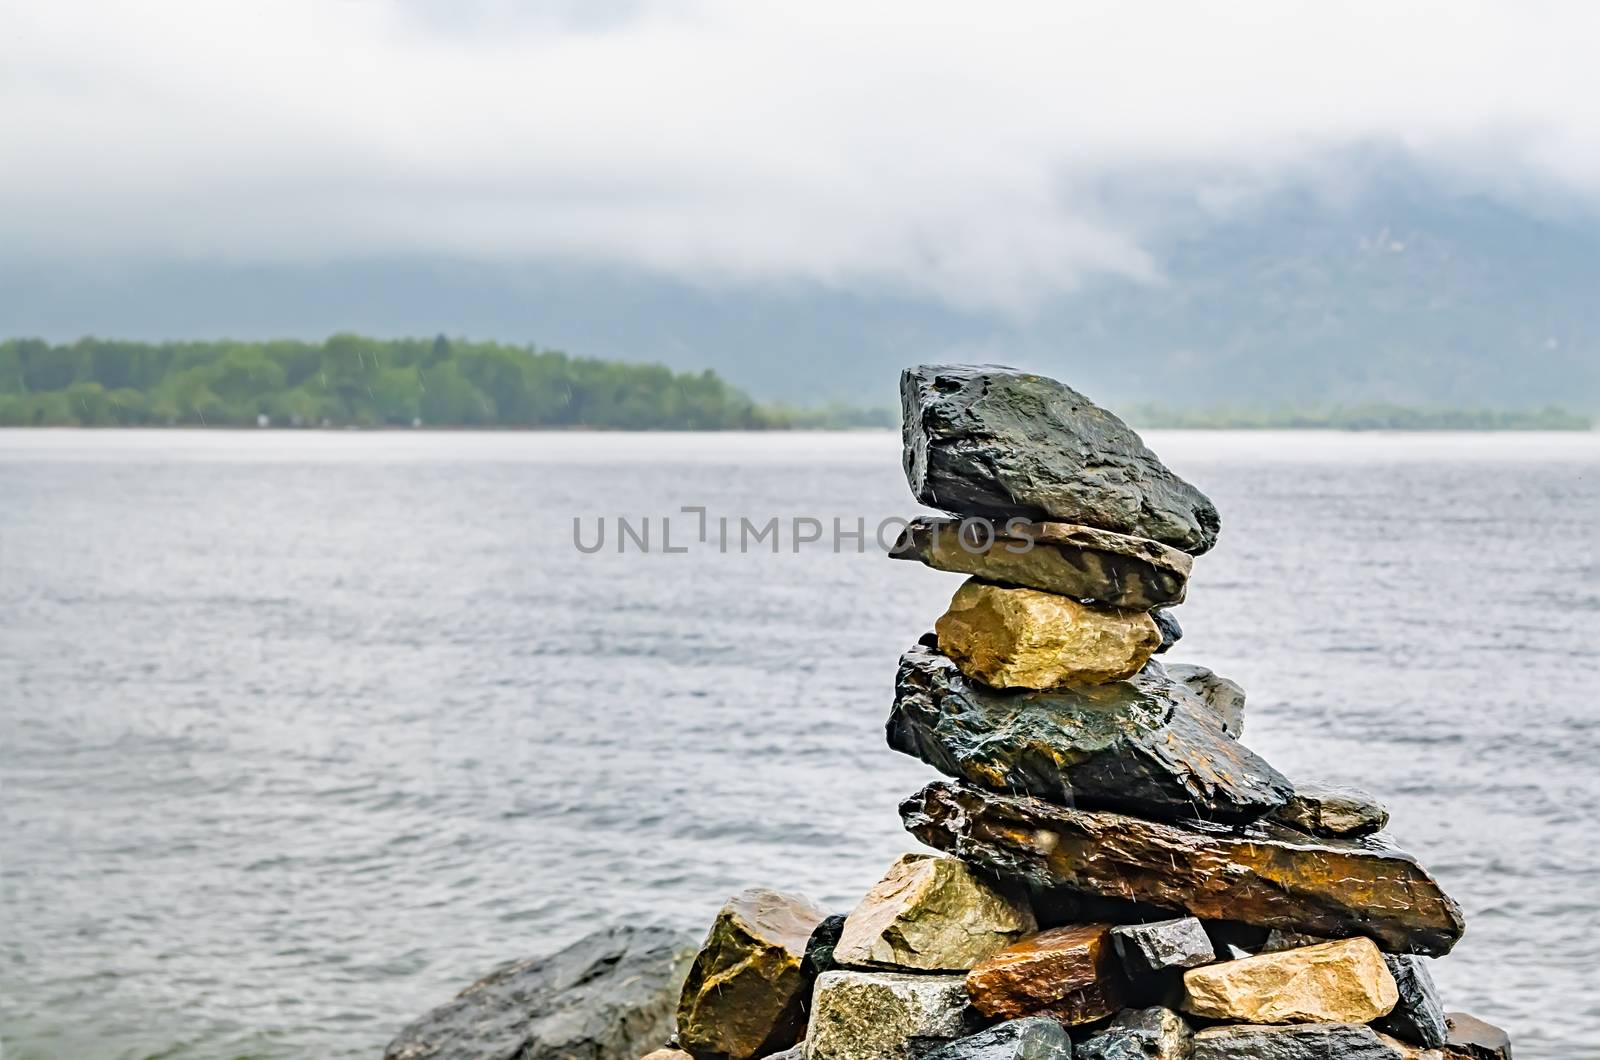 stones laid in the form of a pyramid lie on the shore of the lake by jk3030